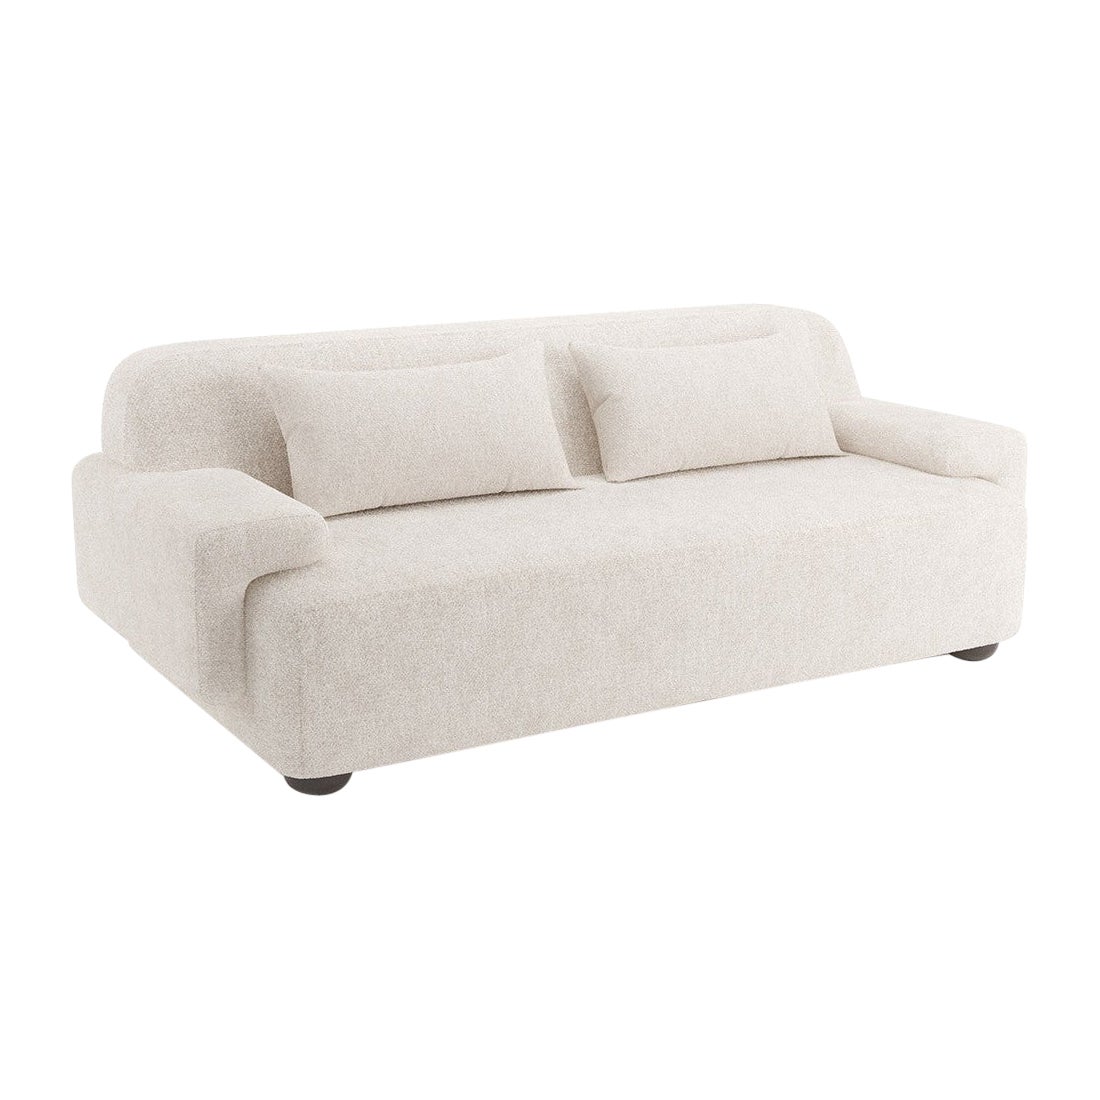 Popus Editions Lena 2.5 Seater Sofa in Gray Antwerp Linen Upholstery For Sale